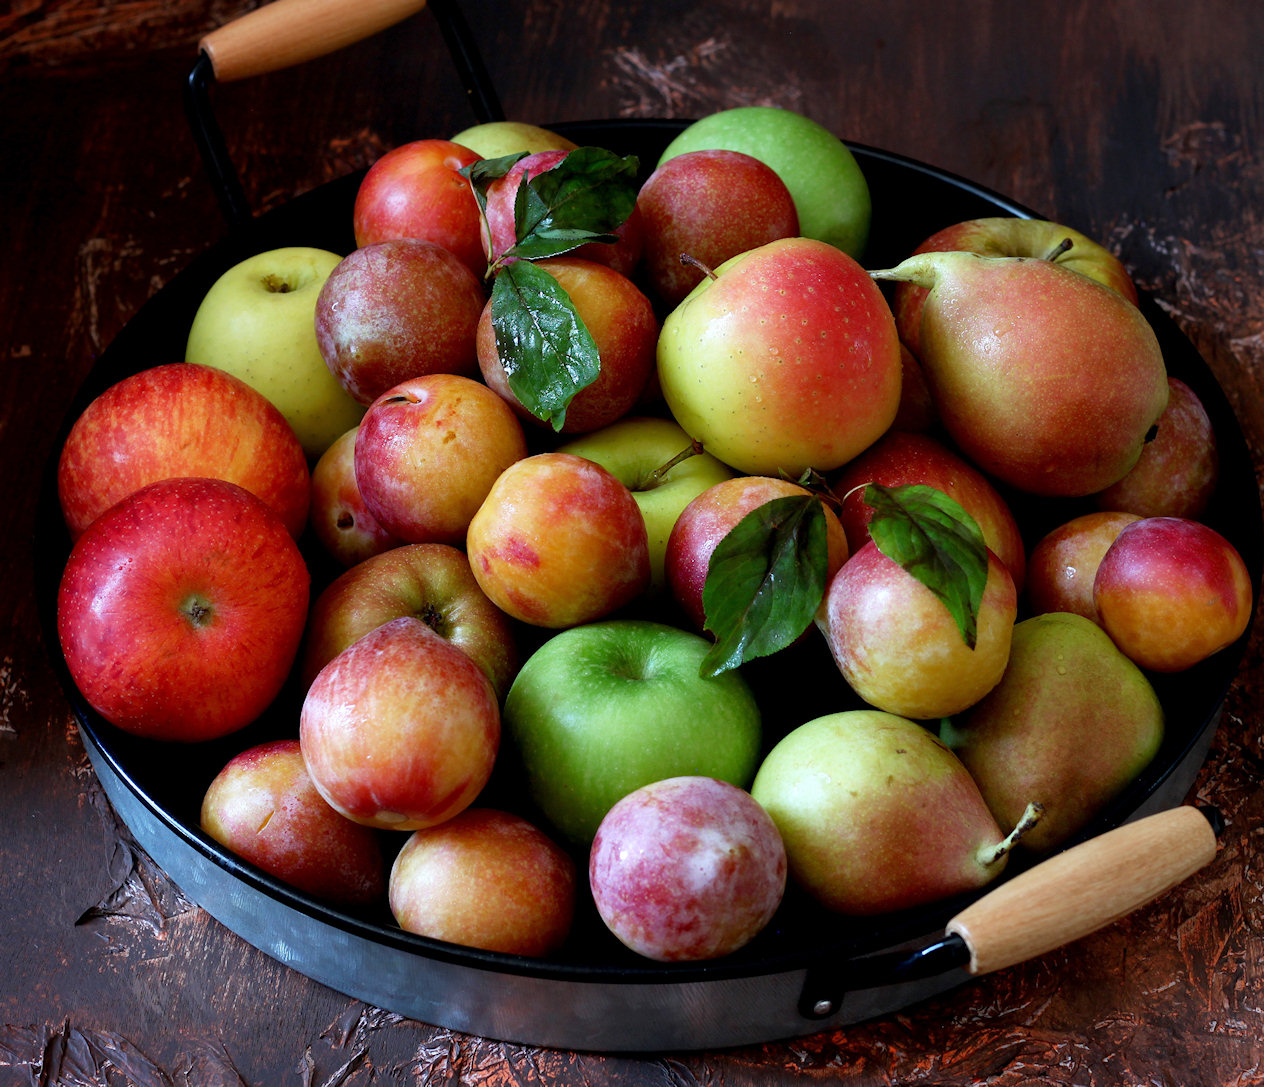 apples-pears-and-plums-jigsaw-puzzle